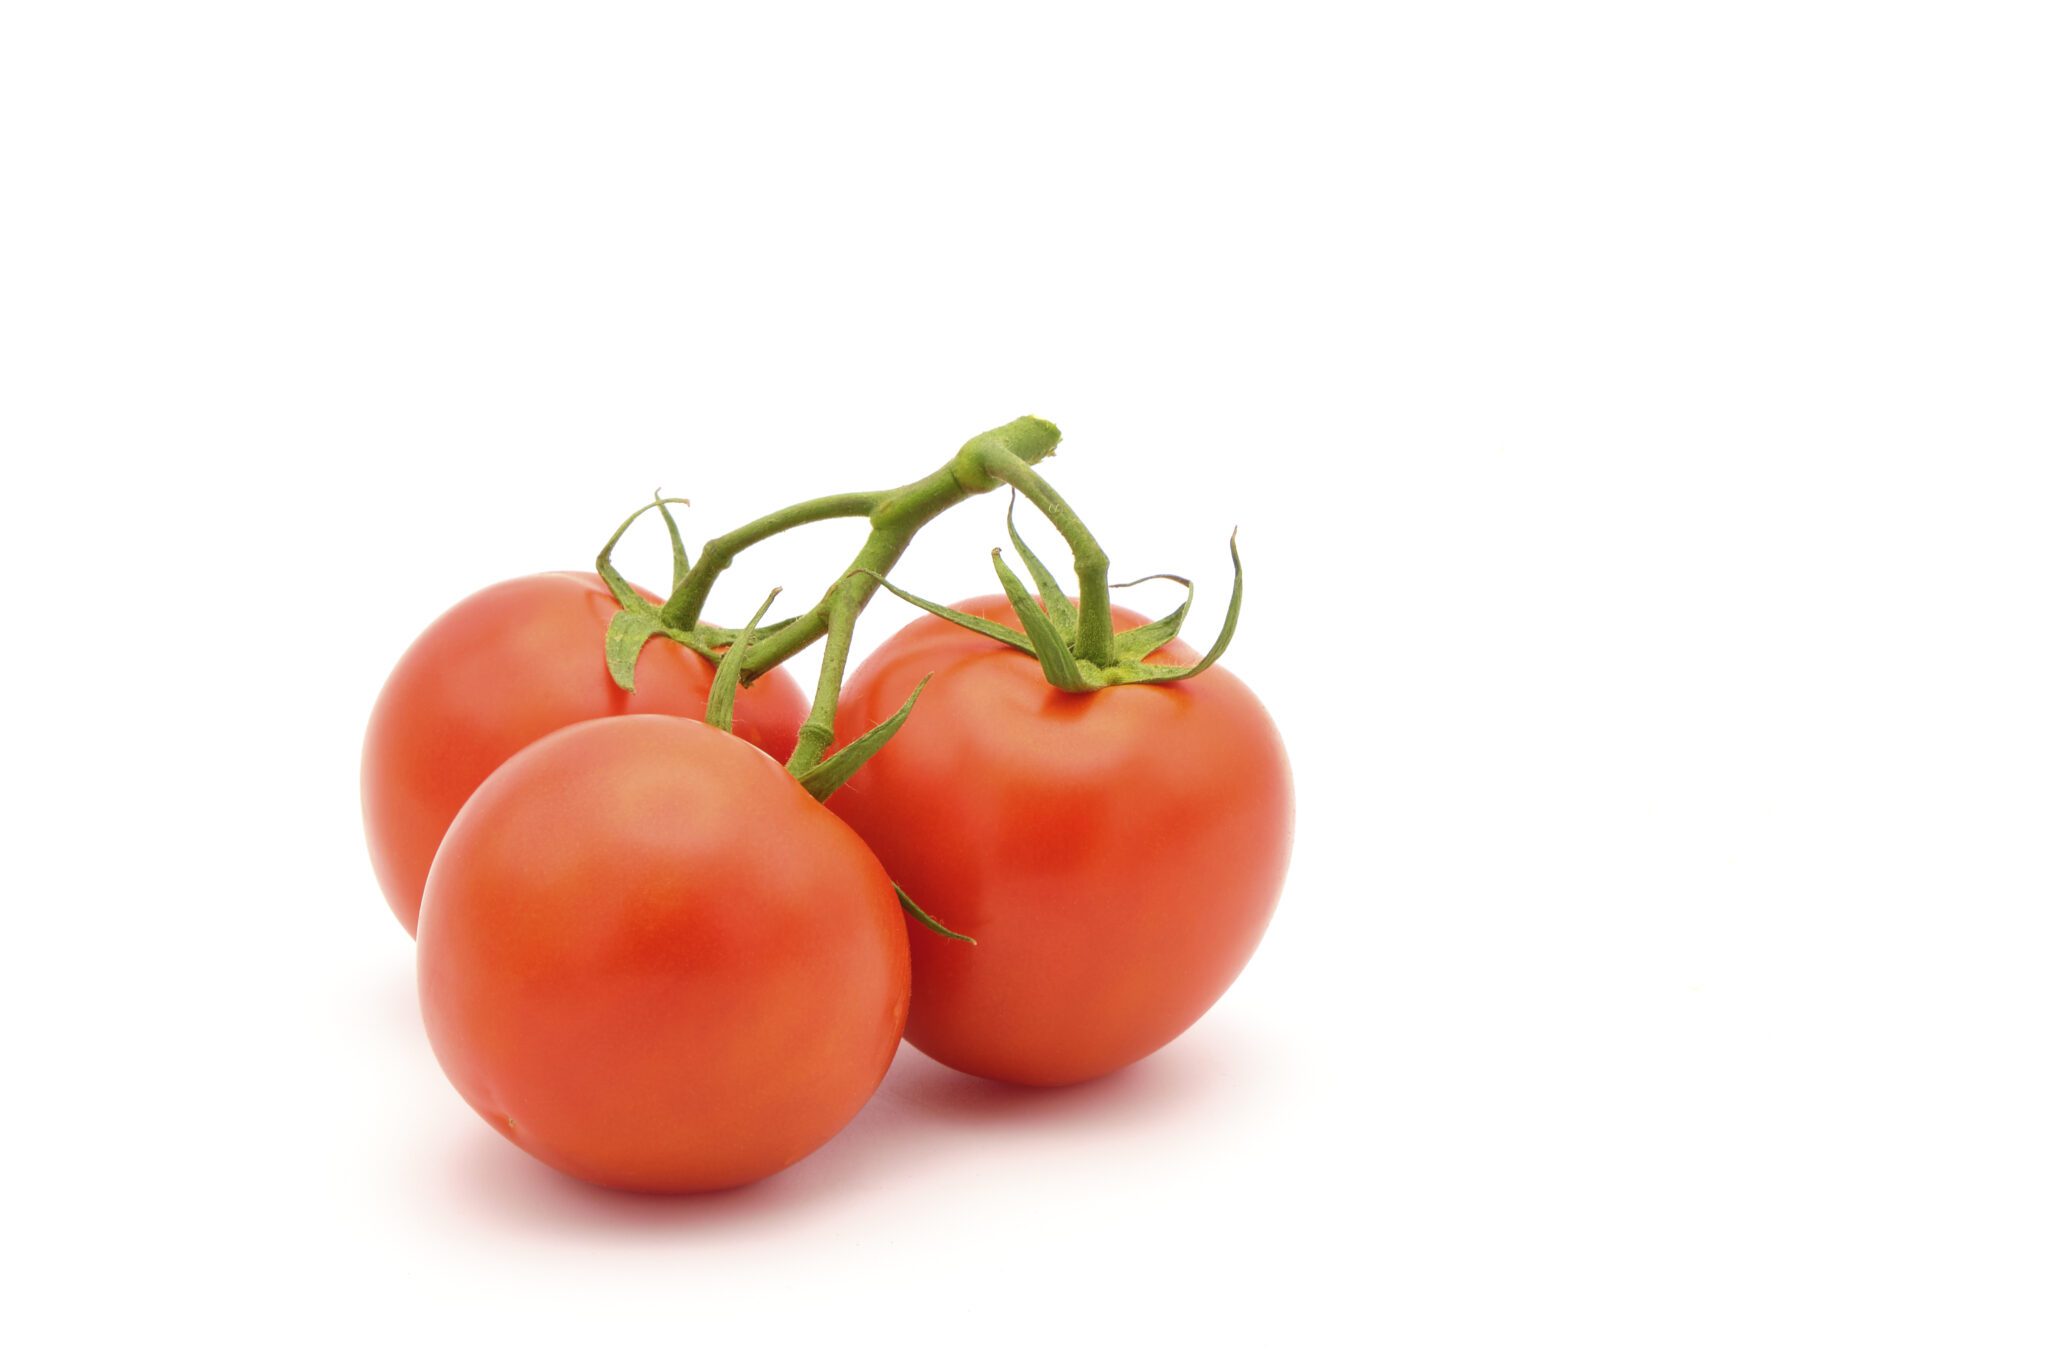 Three vine ripened red tomatoes photographed on a white background with ample copy space.